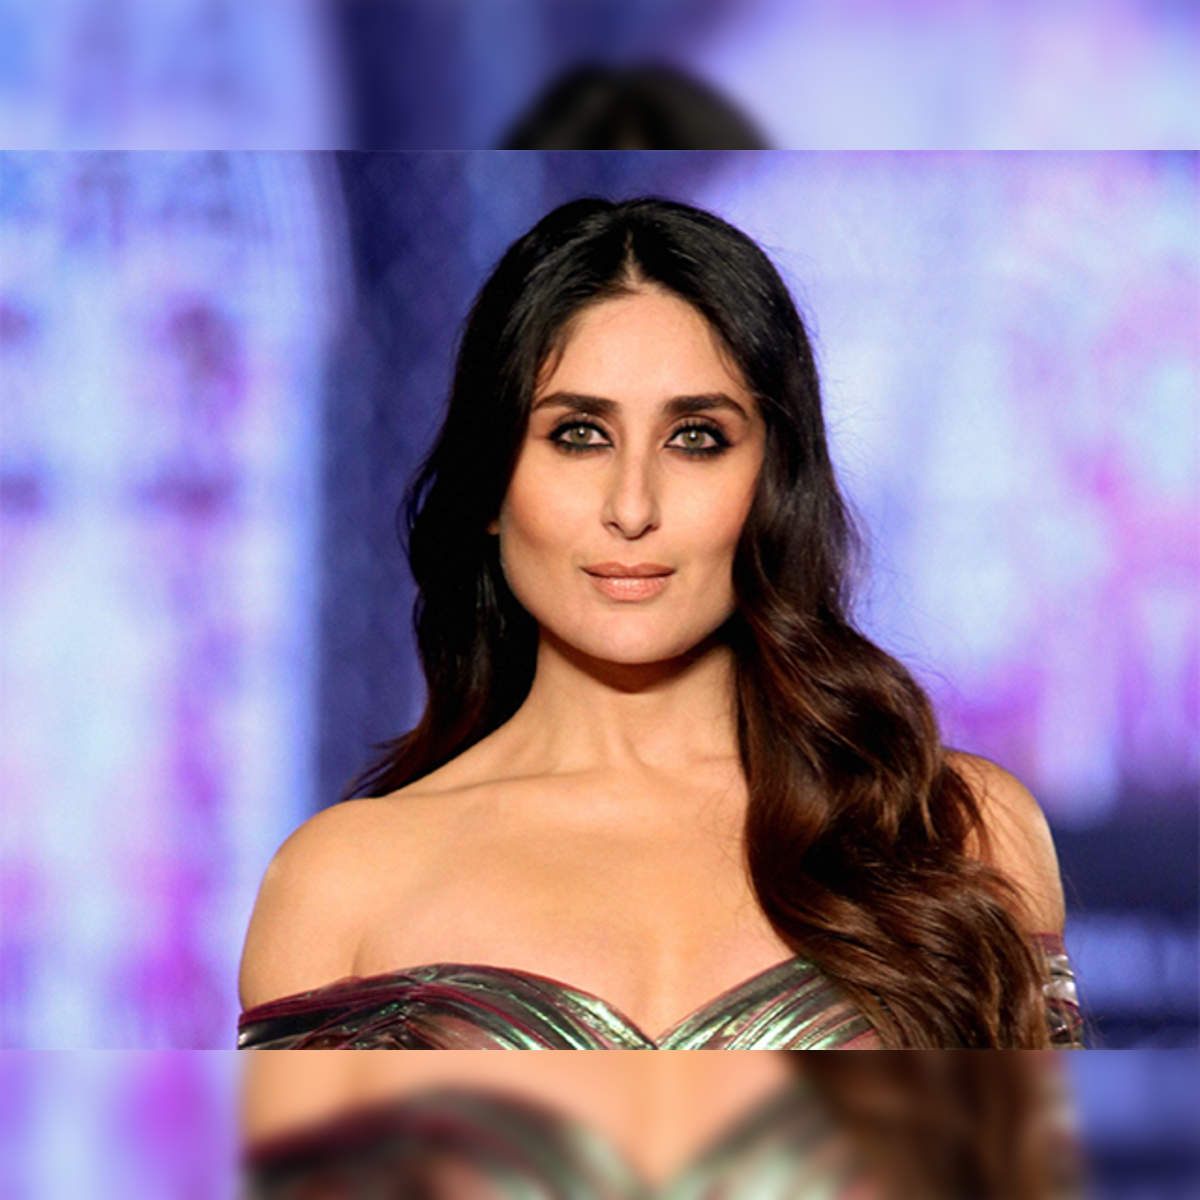 Xxxx Kareena Video Sex - Kareena Kapoor Khan: Kareena Kapoor turns 38, has spent 18 yrs in Bollywood  but is in no mood to stop - The Economic Times